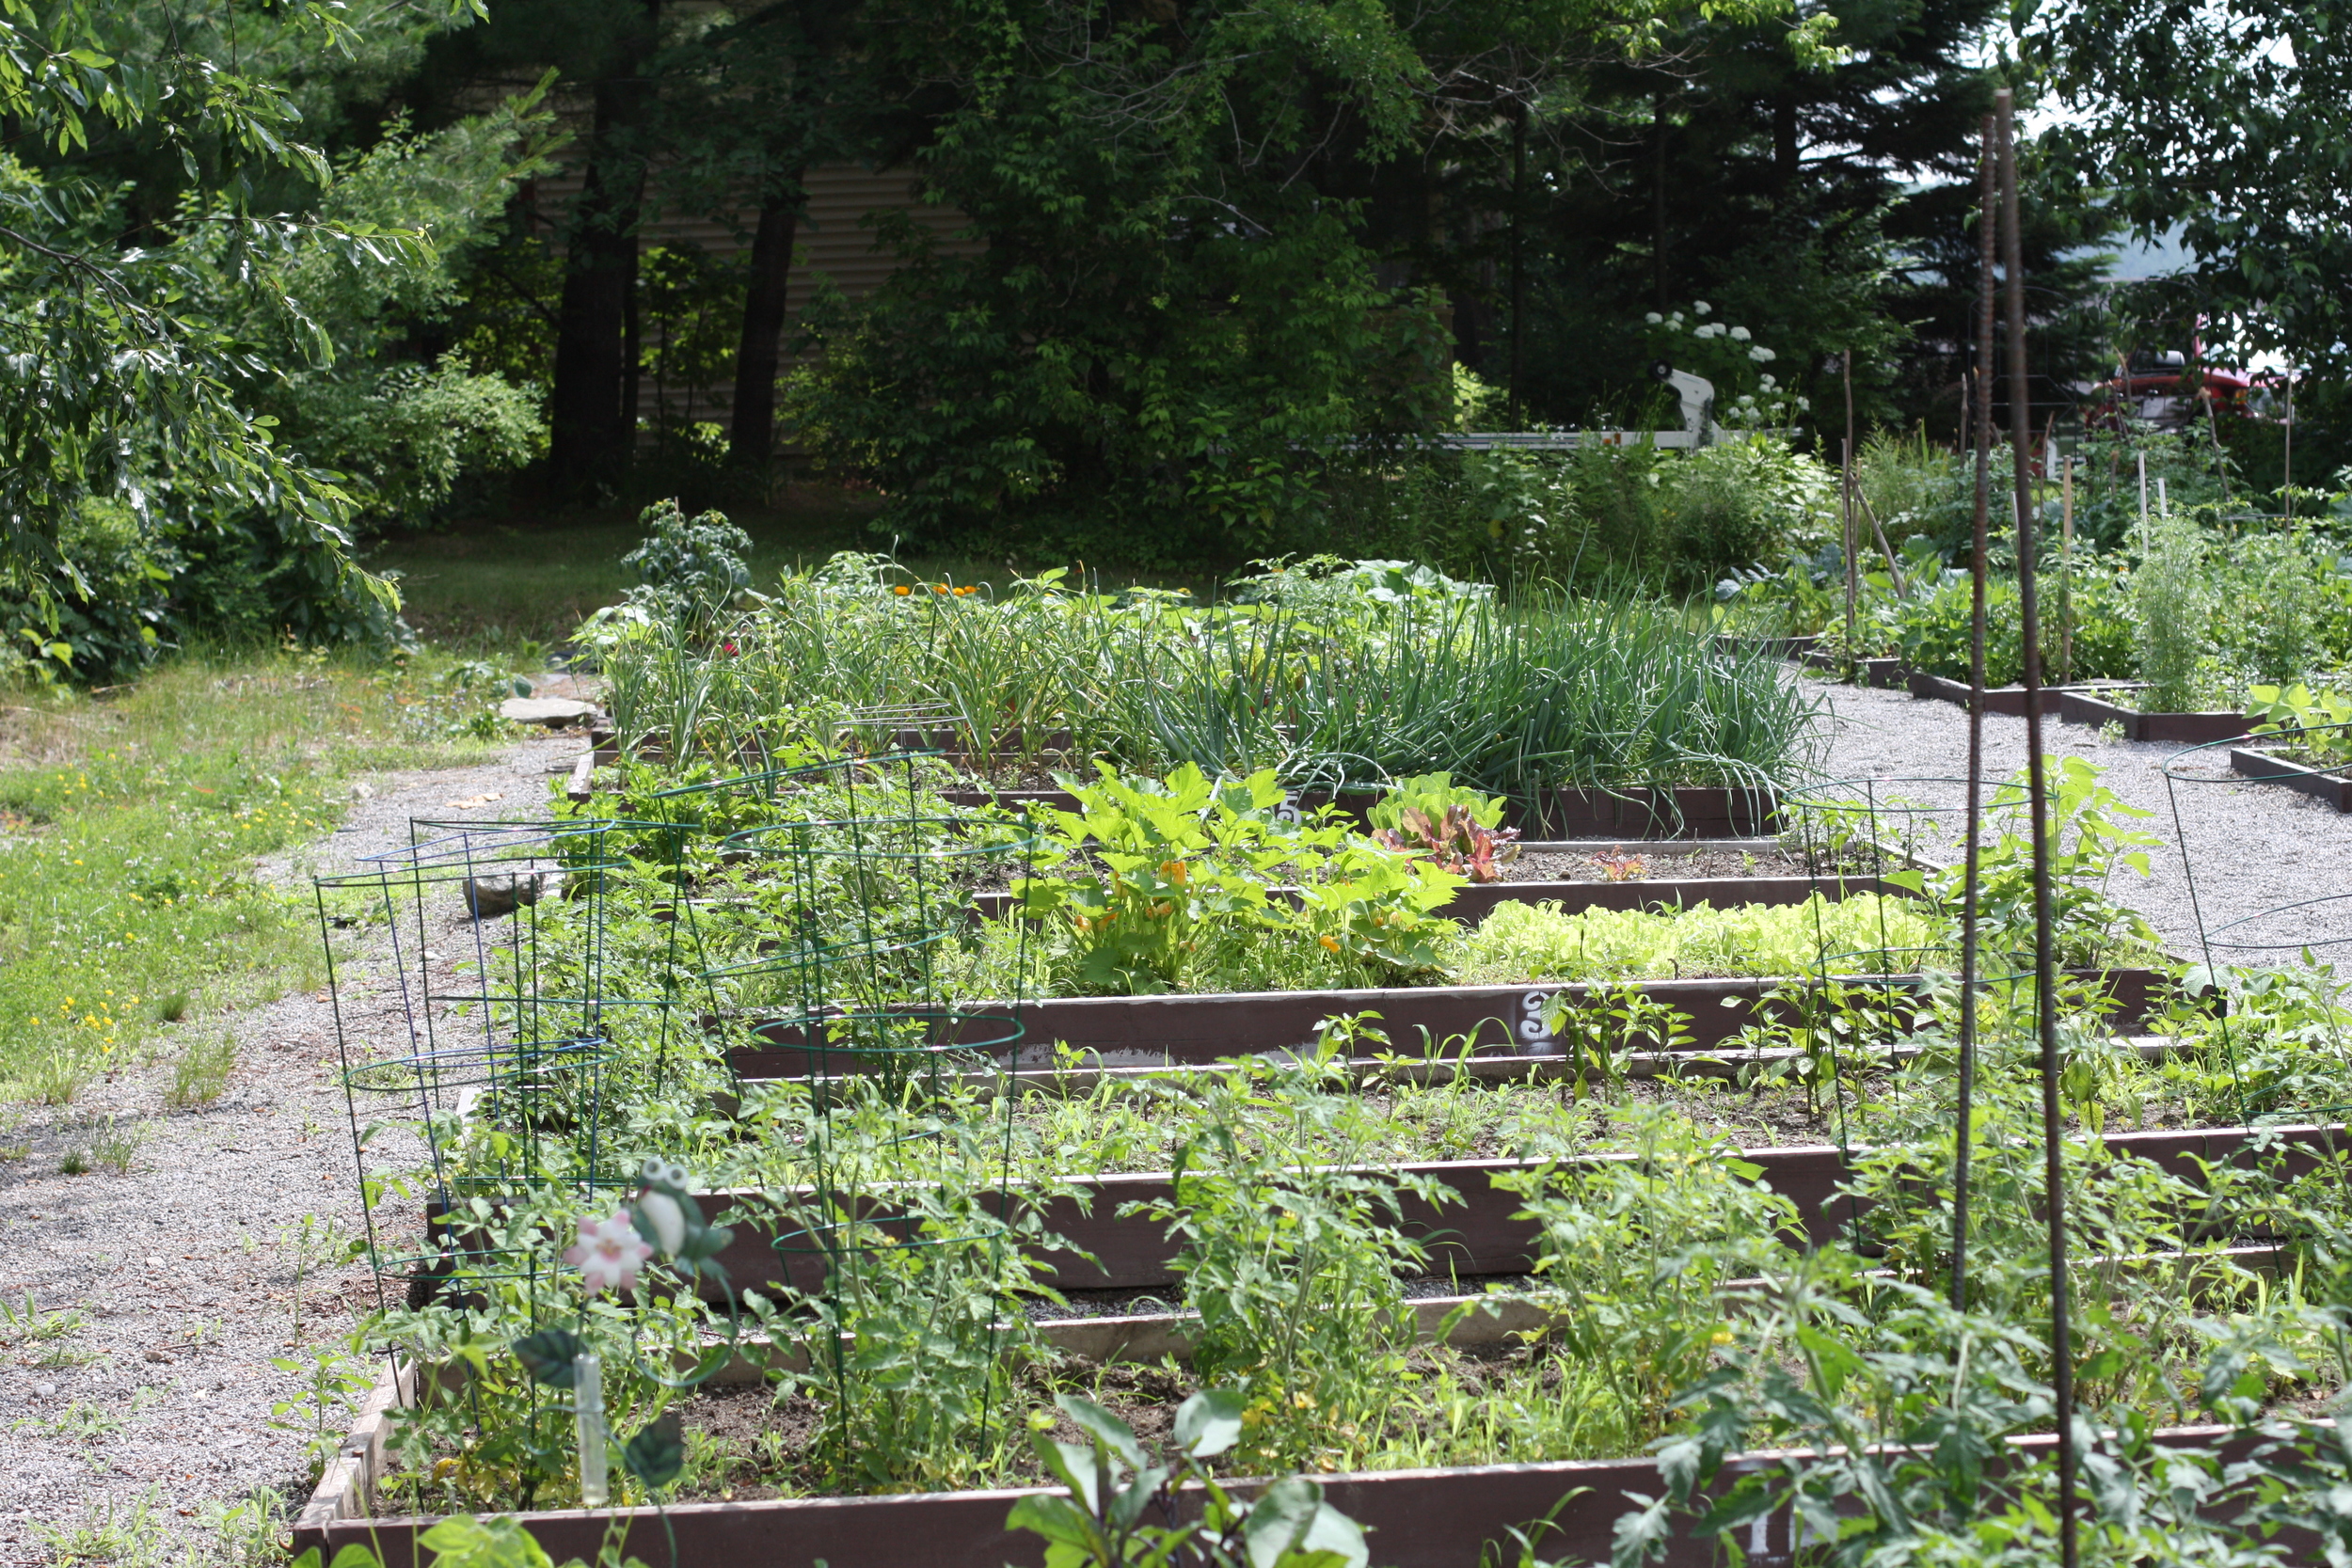 Check out our fine Community Garden -- situated between the Glens Falls National Bank and the Higher Grounds Coffee Shop.